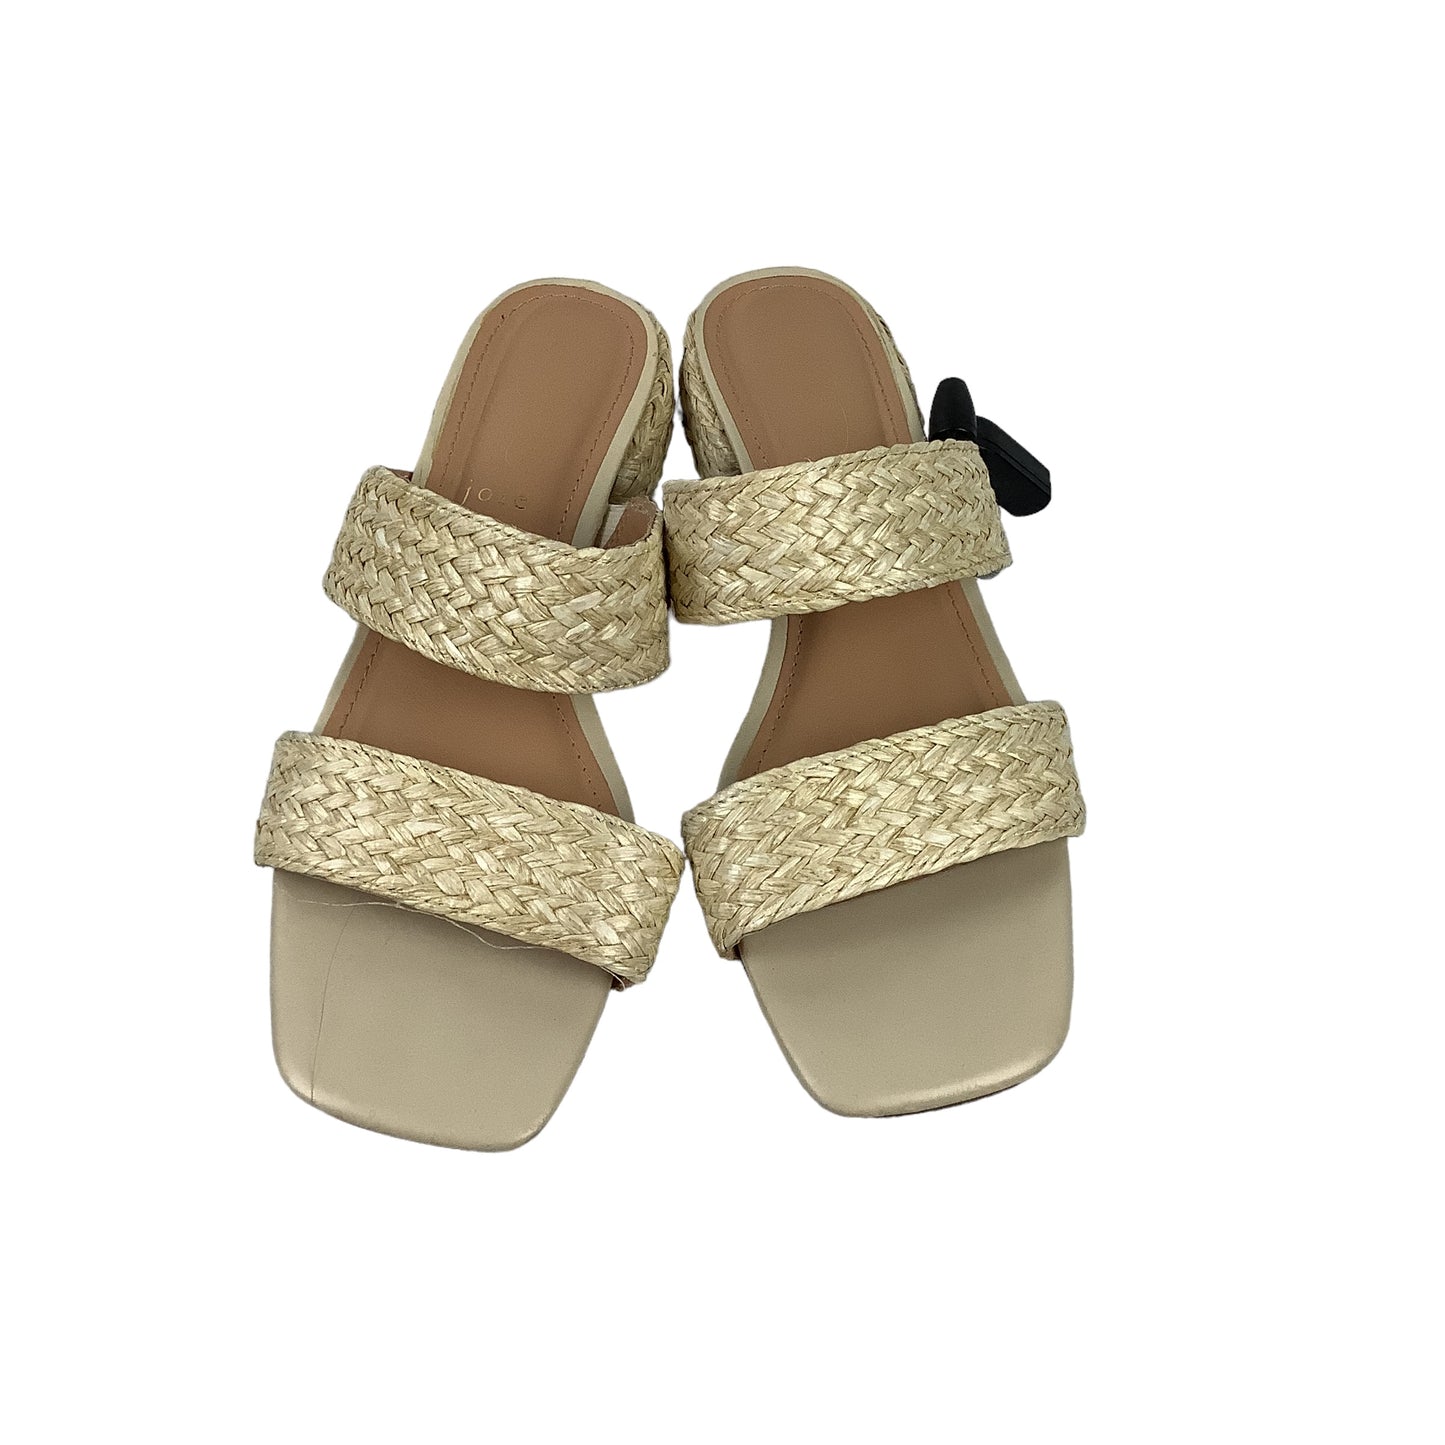 Sandals Flats By Joie  Size: 7